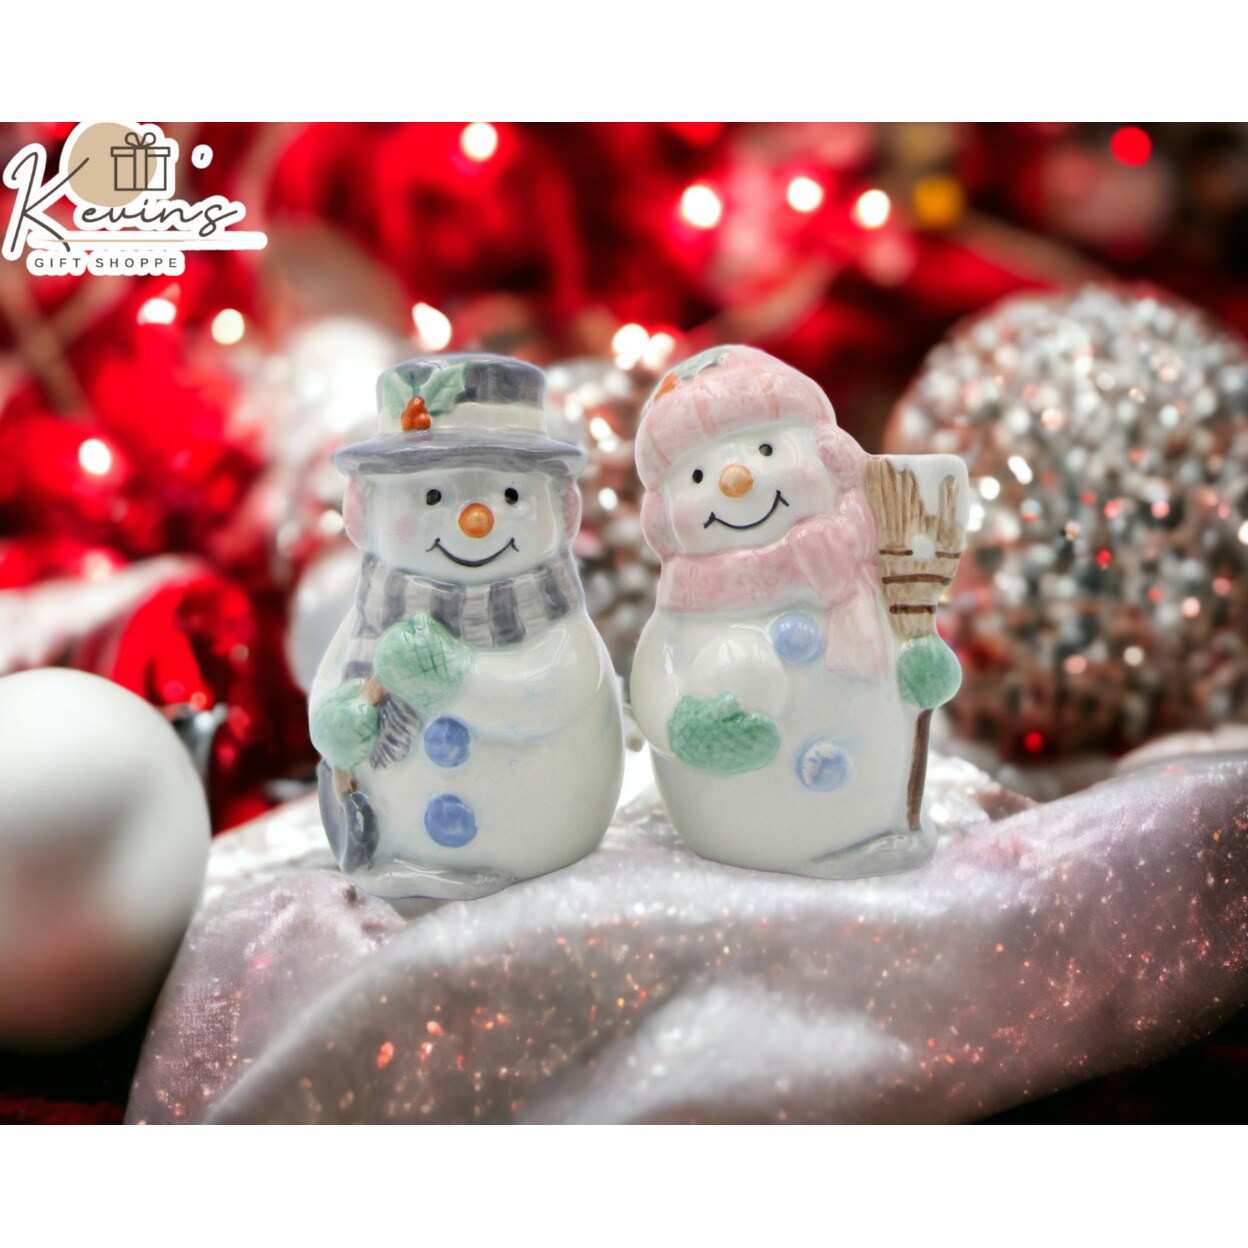 kevinsgiftshoppe Ceramic Frosty the Snowman  Ceramic Salt and Pepper Shakers Home Decor   Kitchen Decor